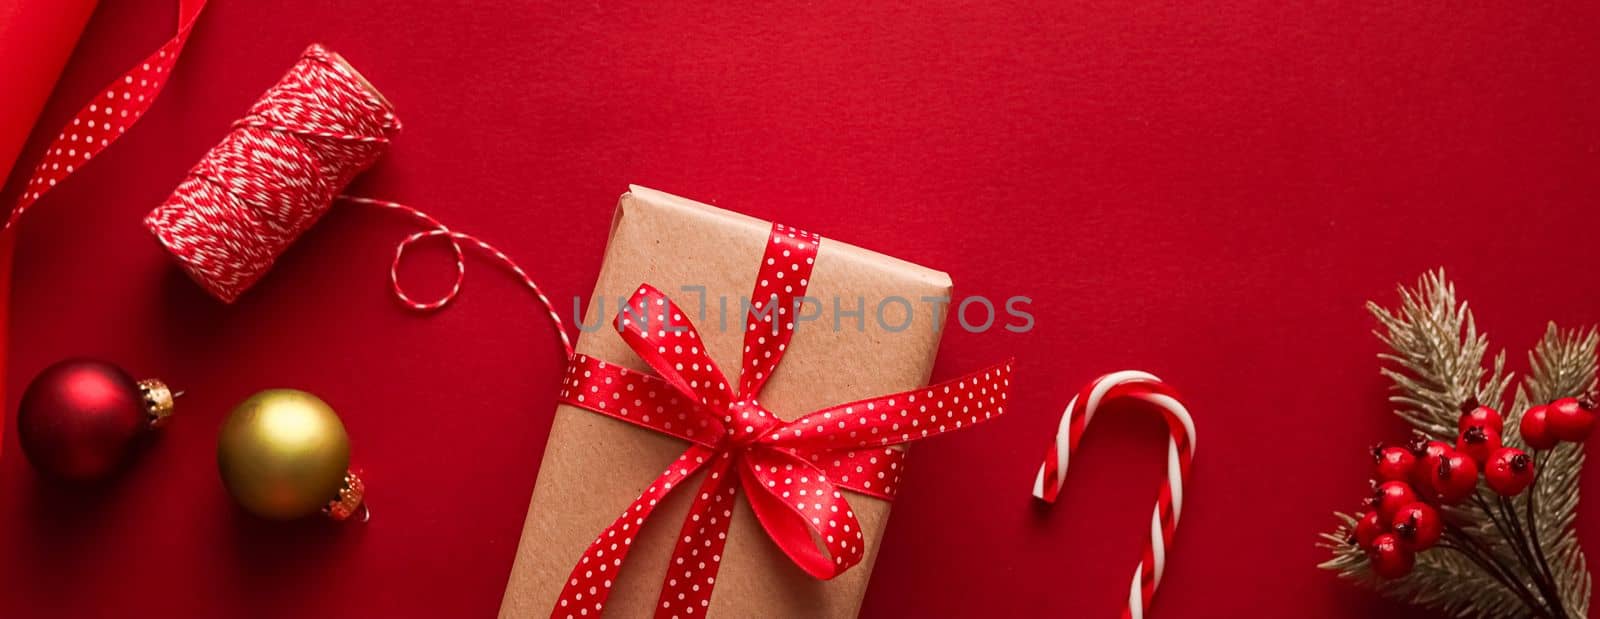 Christmas preparation, boxing day and holidays gift giving, xmas craft paper and ribbons for gifts boxes on red background as wrapping tools and decorations, diy presents as holiday flat lay design